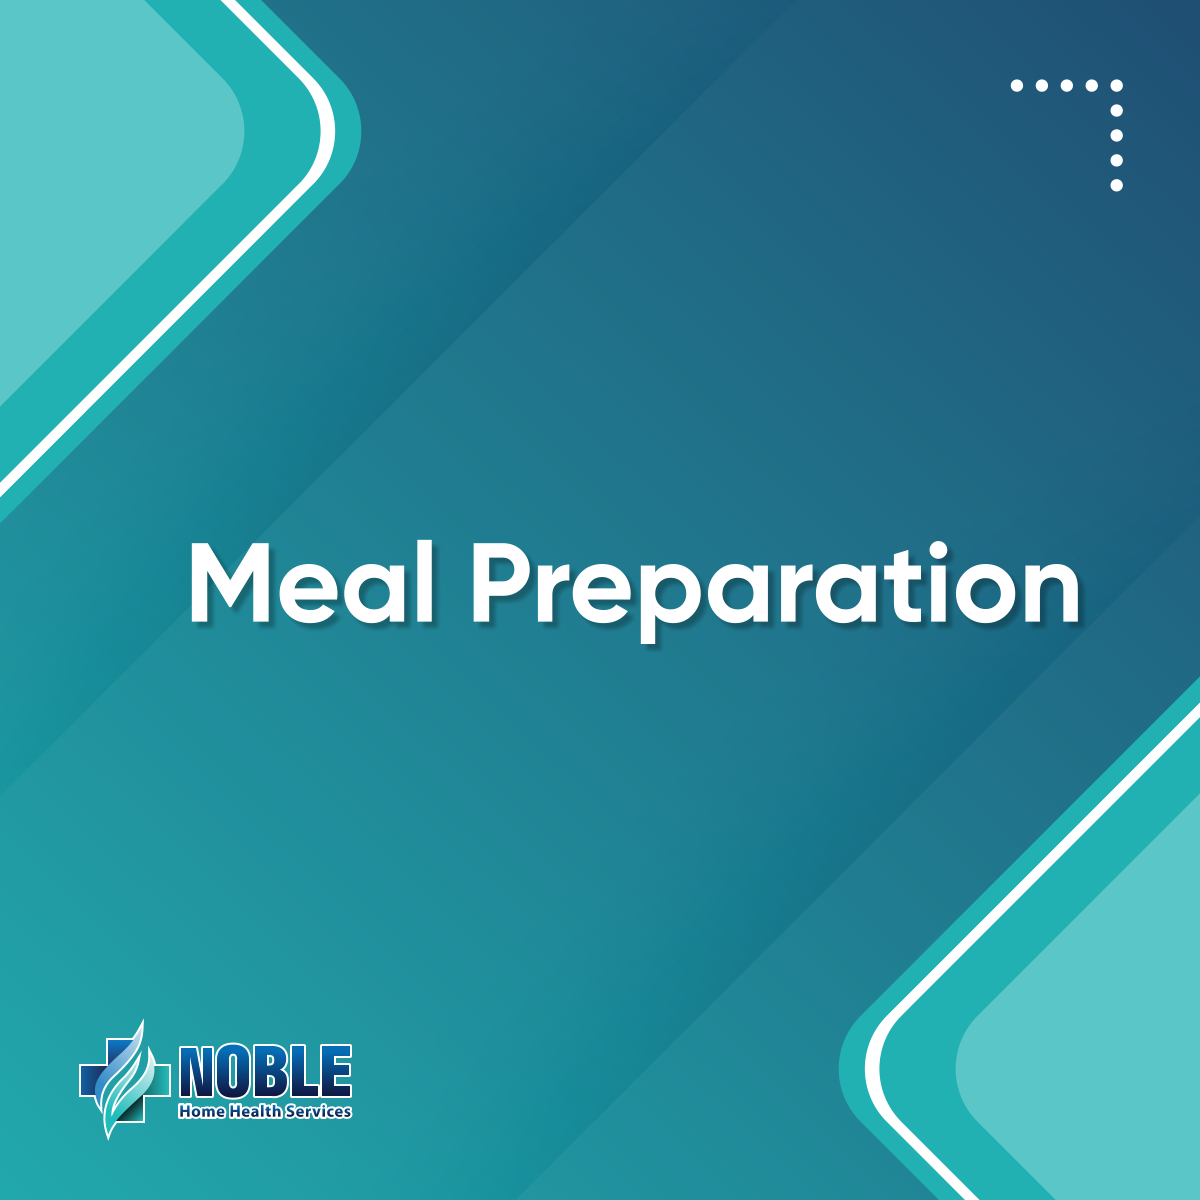 It's vital to consume the appropriate meals for your age and demands in quantity and quality type. We assist in meal preparation to optimize overall health for your elderly family members and even those staying with us. Call us at 888-404-1321 for more details.

#MealPreparation